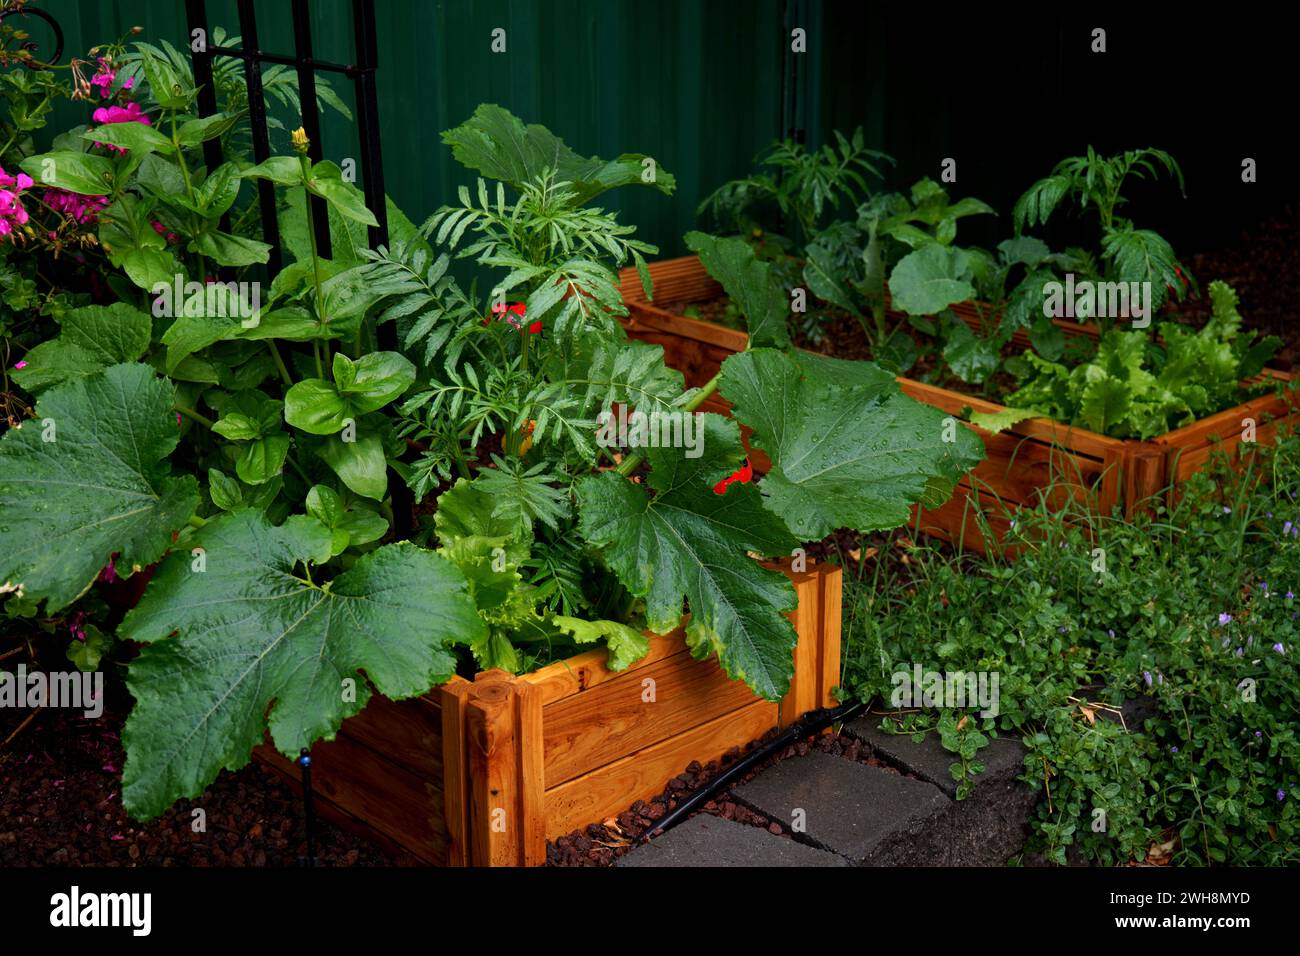 Raised bed homegrown vegetable garden in wooden planter boxes with companion plants to ward off pests and diseases. Stock Photo